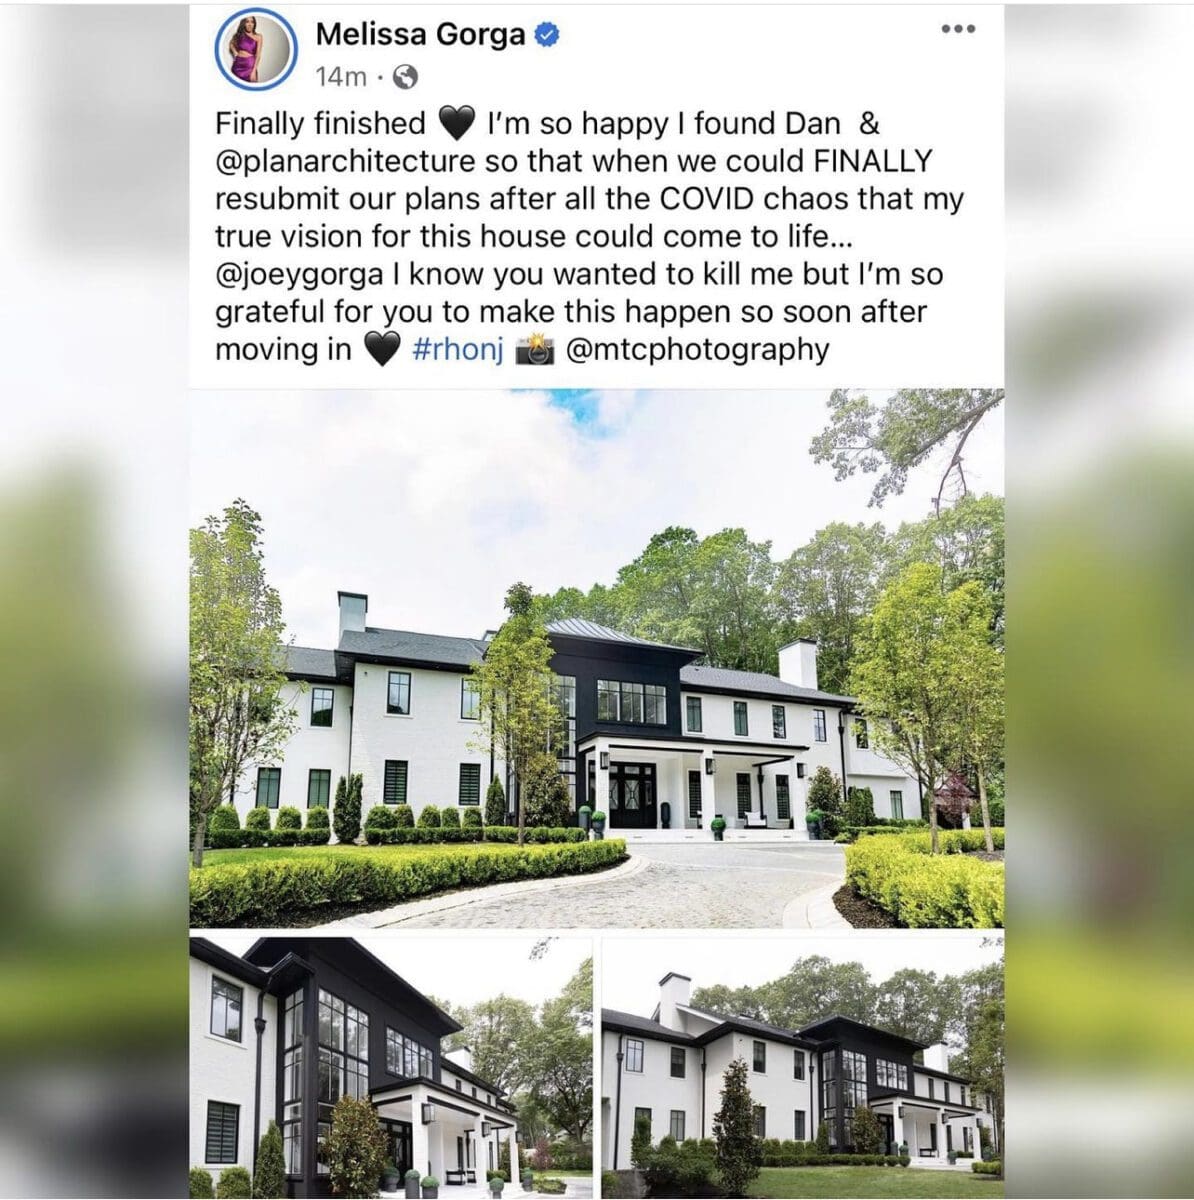 RHONJ's Melissa Gorga gushing about completed dream home